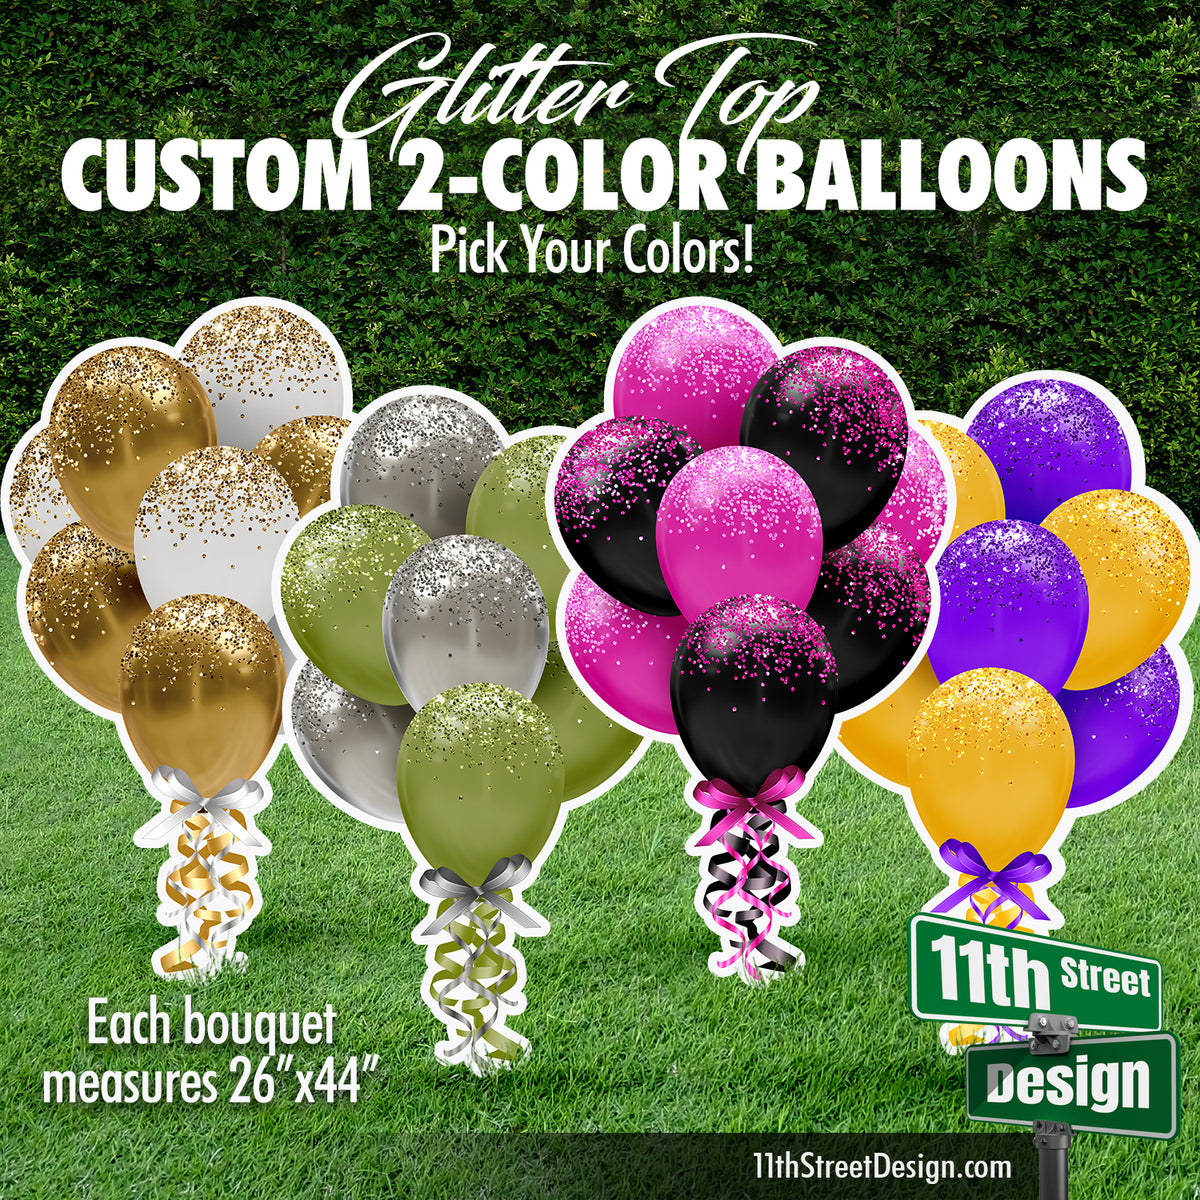 Custom 2-Color Glitter Top Balloon Bouquet (choose your colors)